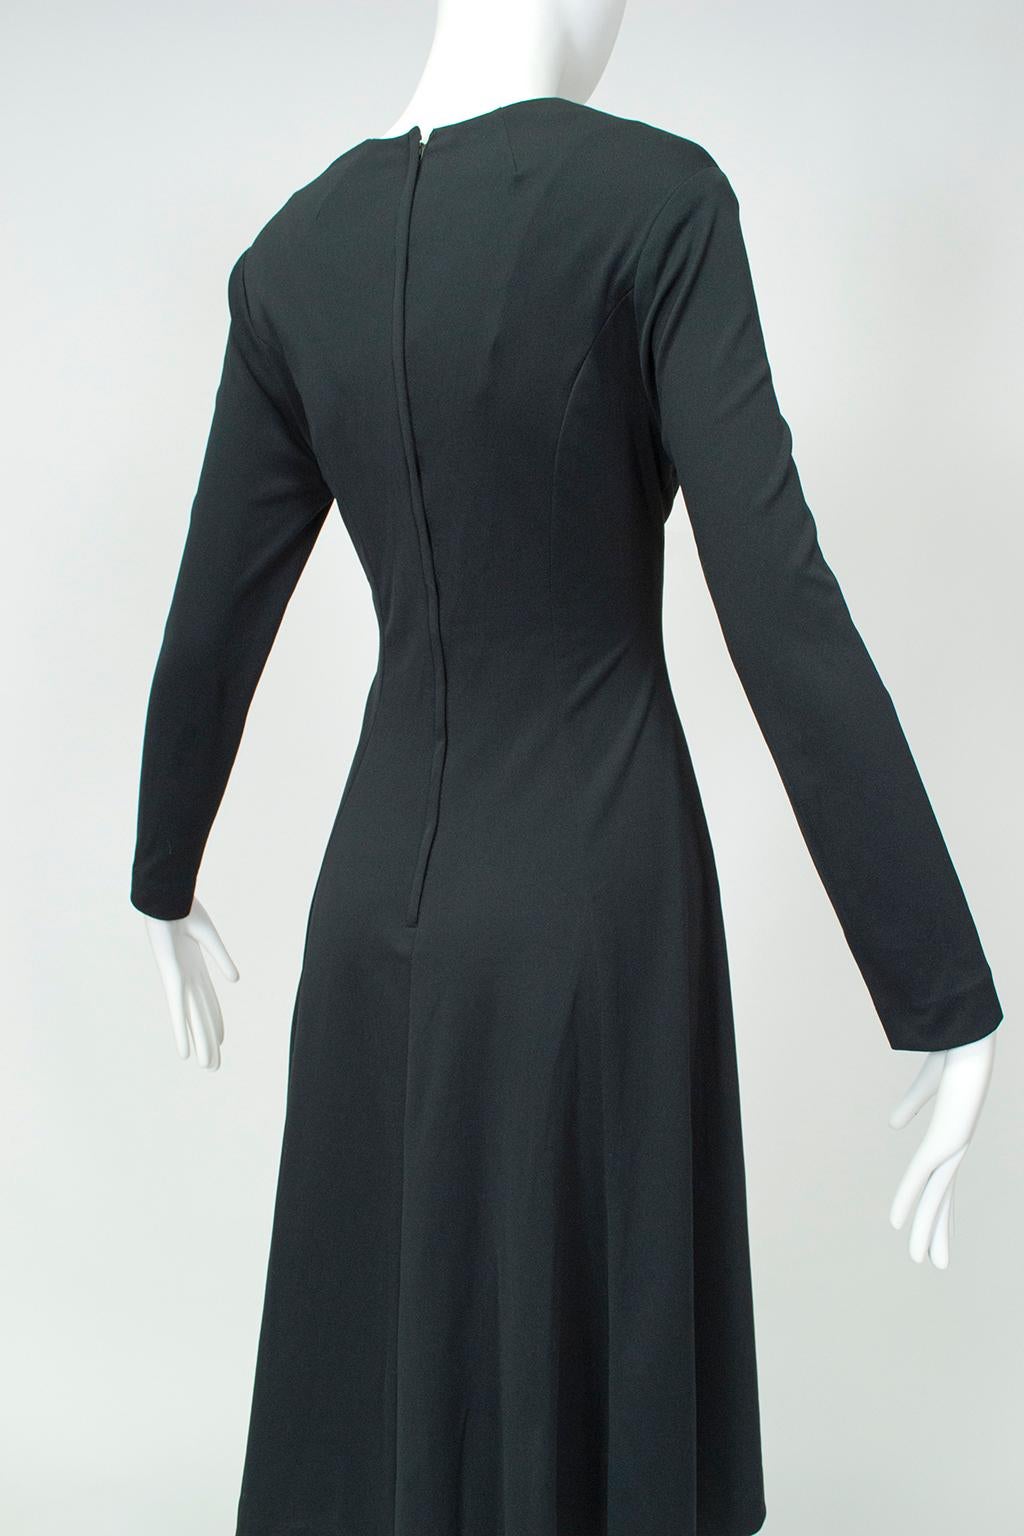 Women's Swirling Black Jersey Disco Day Dress with Plunging Bodice – M, 1960s For Sale